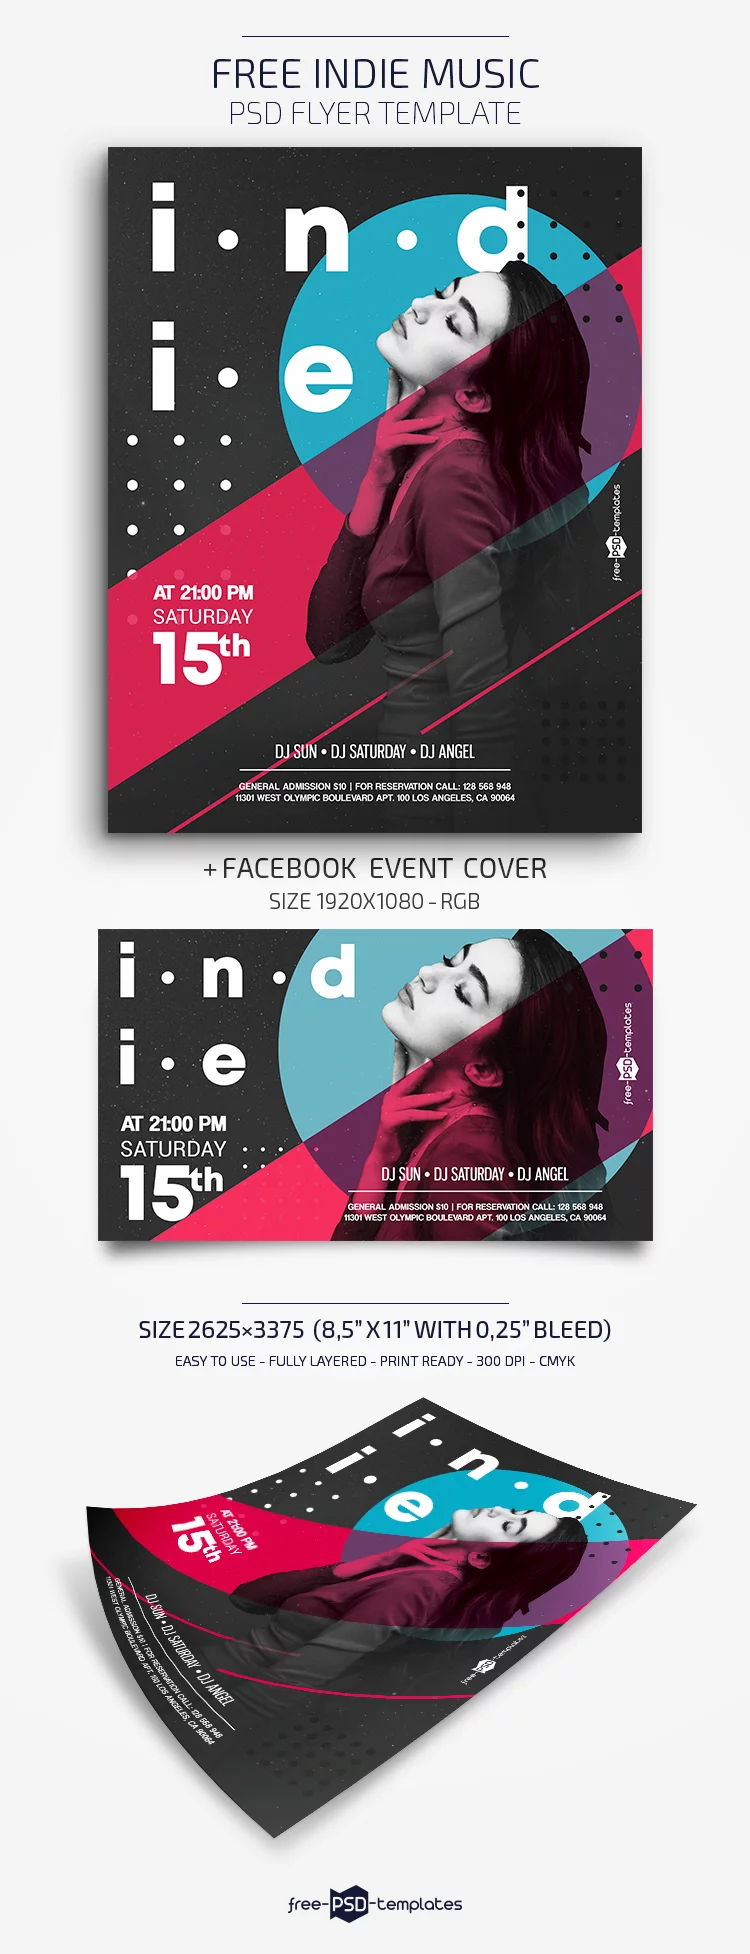 Free Indie Music Flyer in PSD